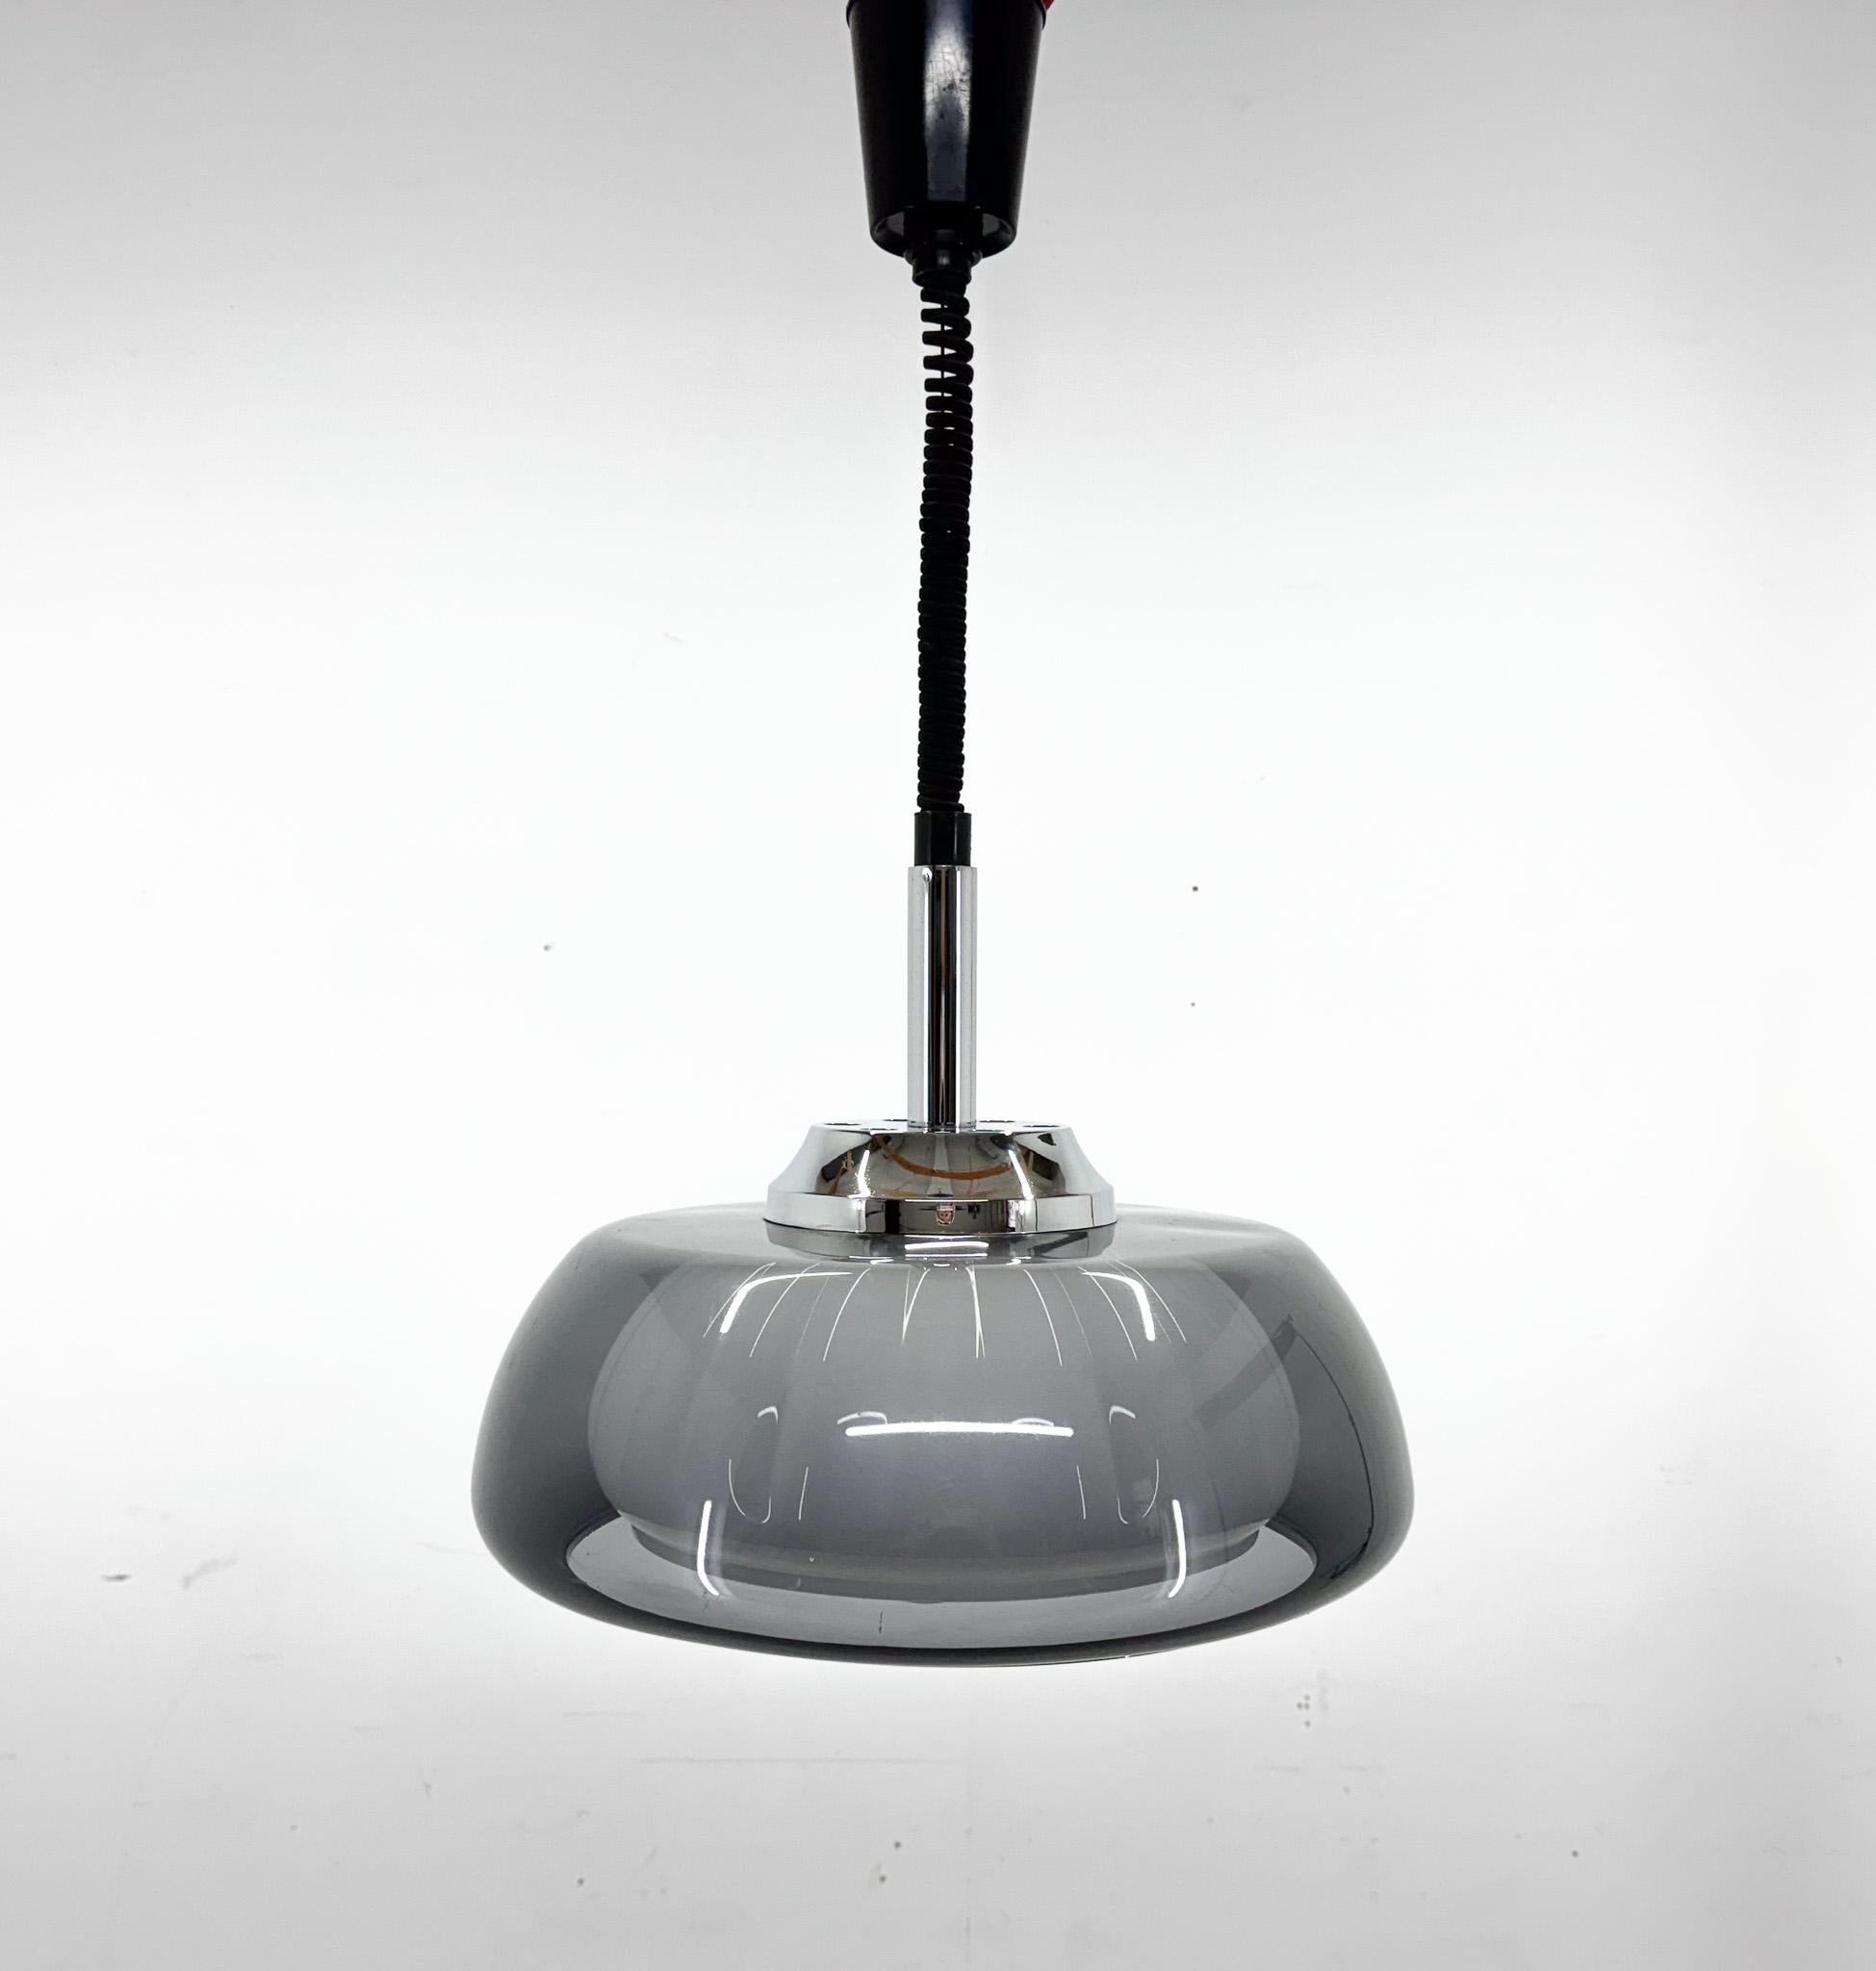 Vintage Italian pendant light with adjustable hight. The maximum lenght is 125 cm. Bulb: 1 x E26-E27. US wiring compatible.